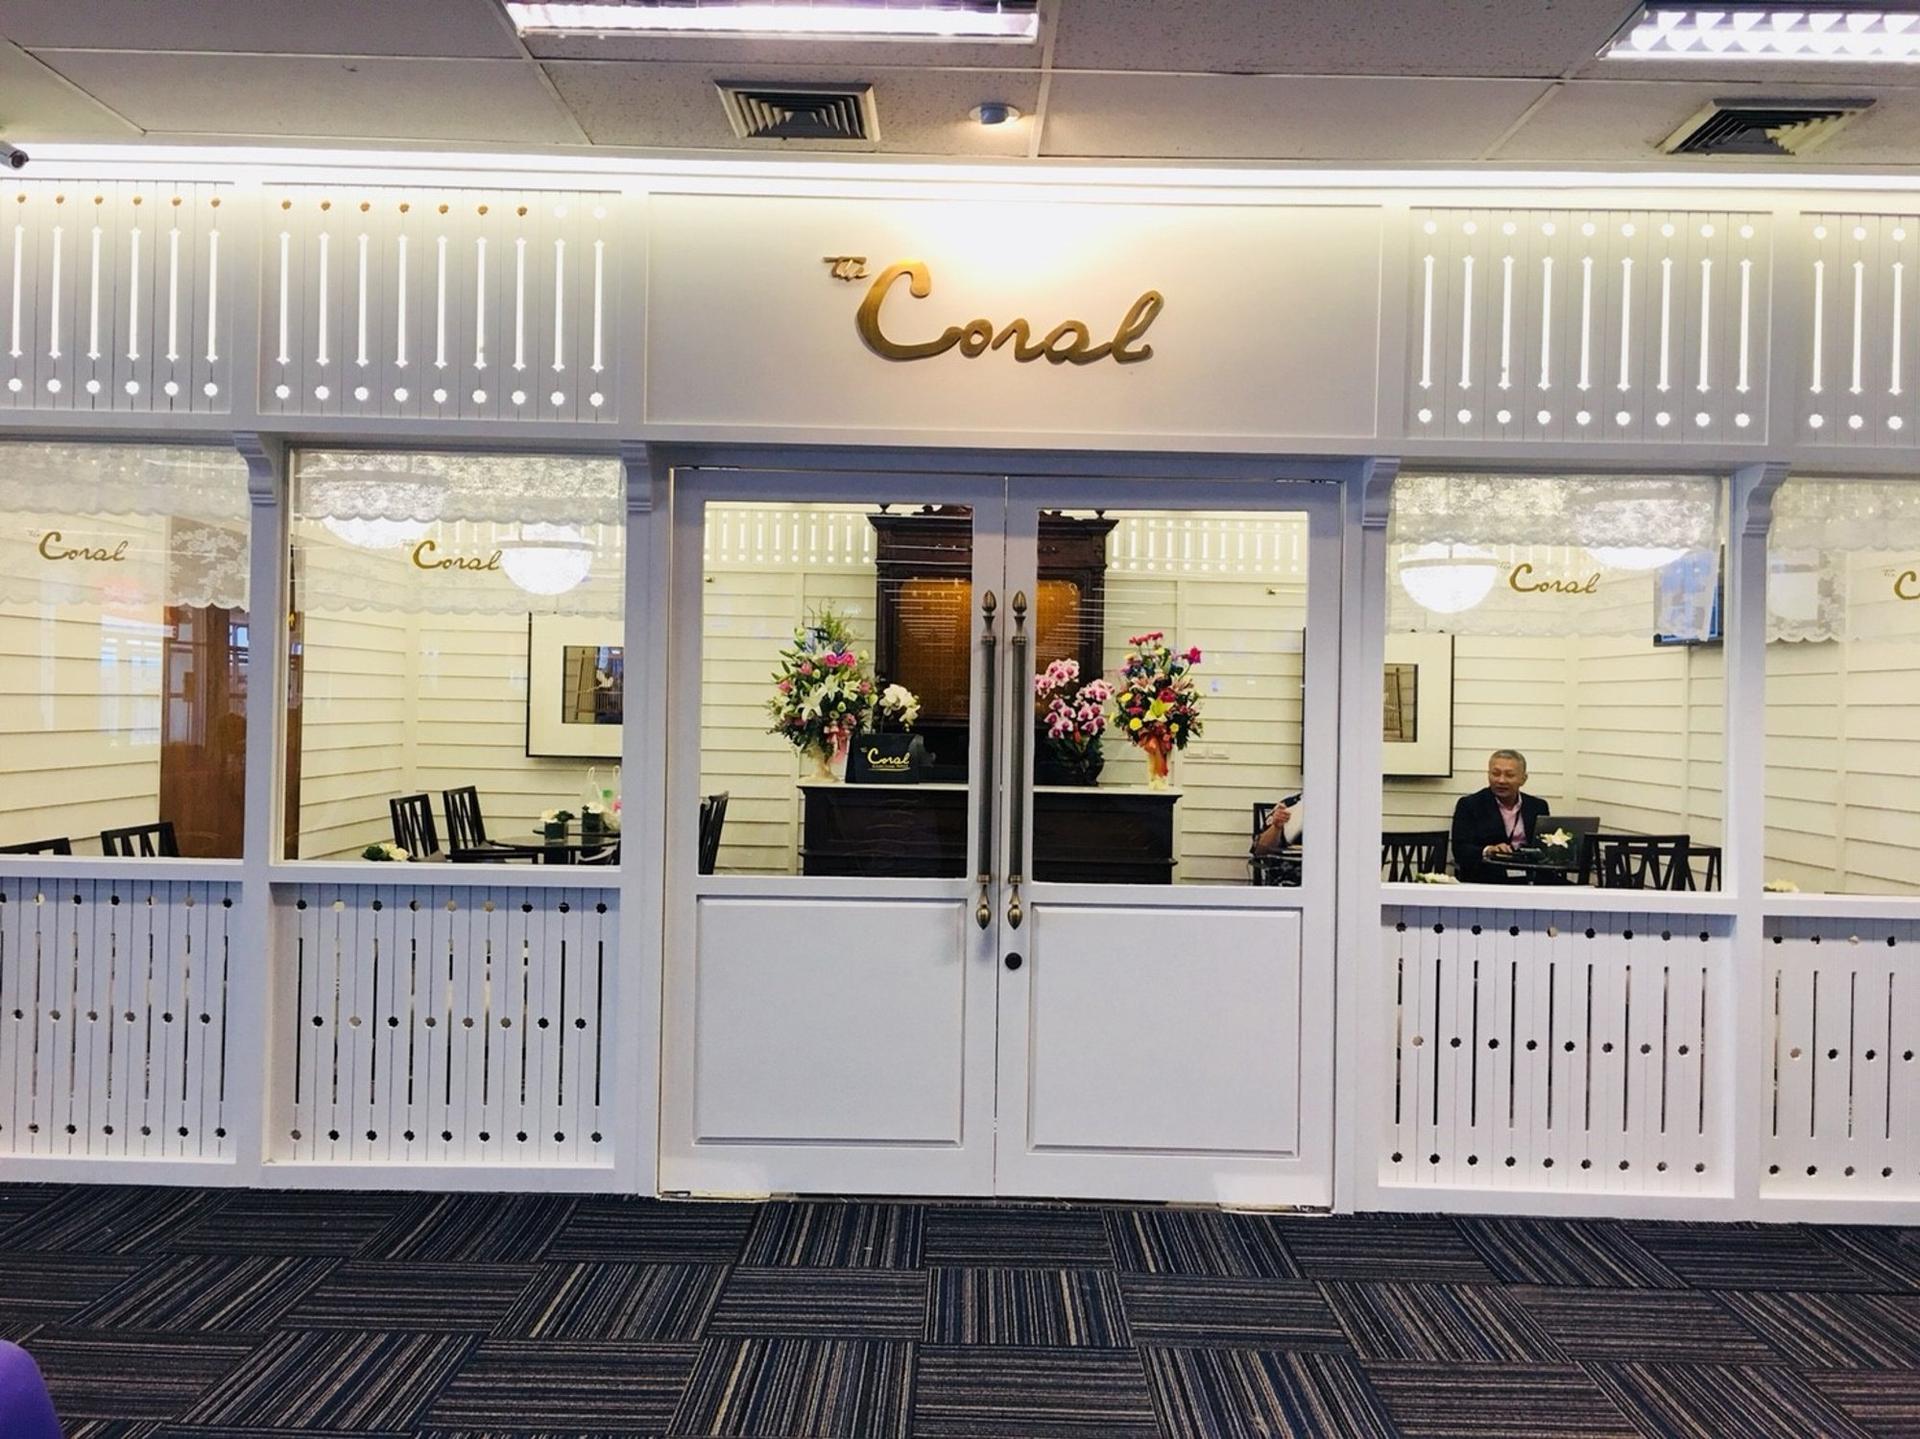 The Coral Executive Lounge image 29 of 30